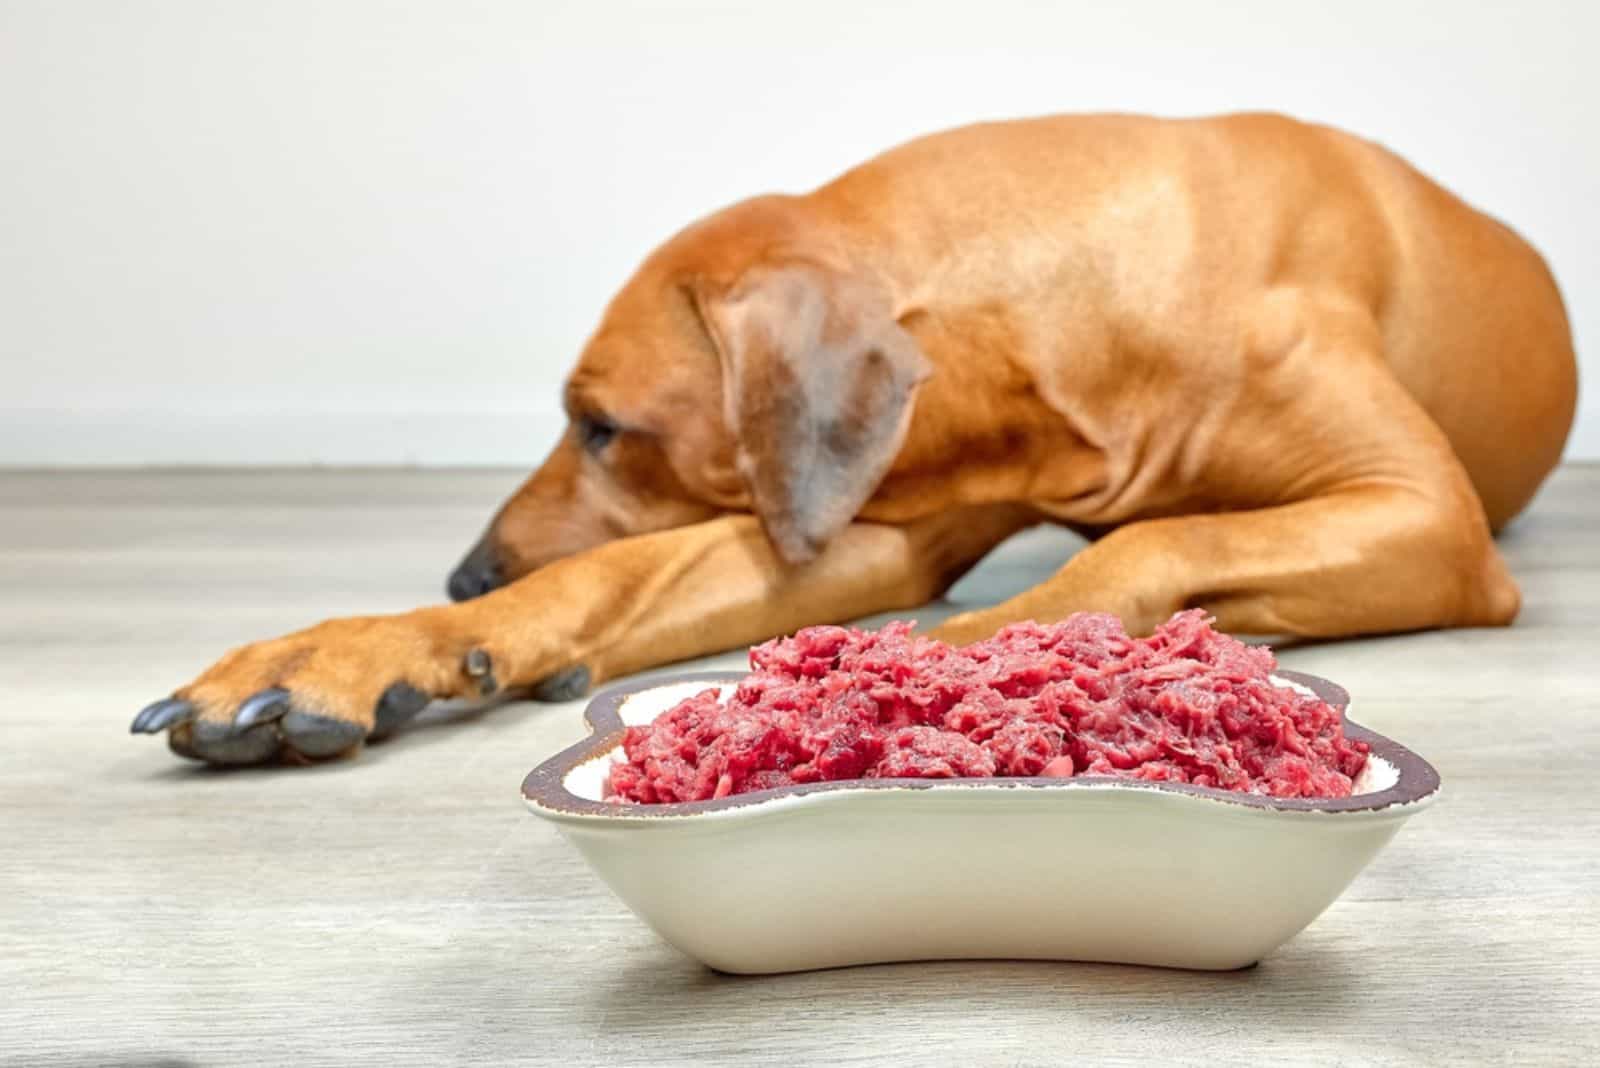 dog lying beside bowl with food and refuses to eat